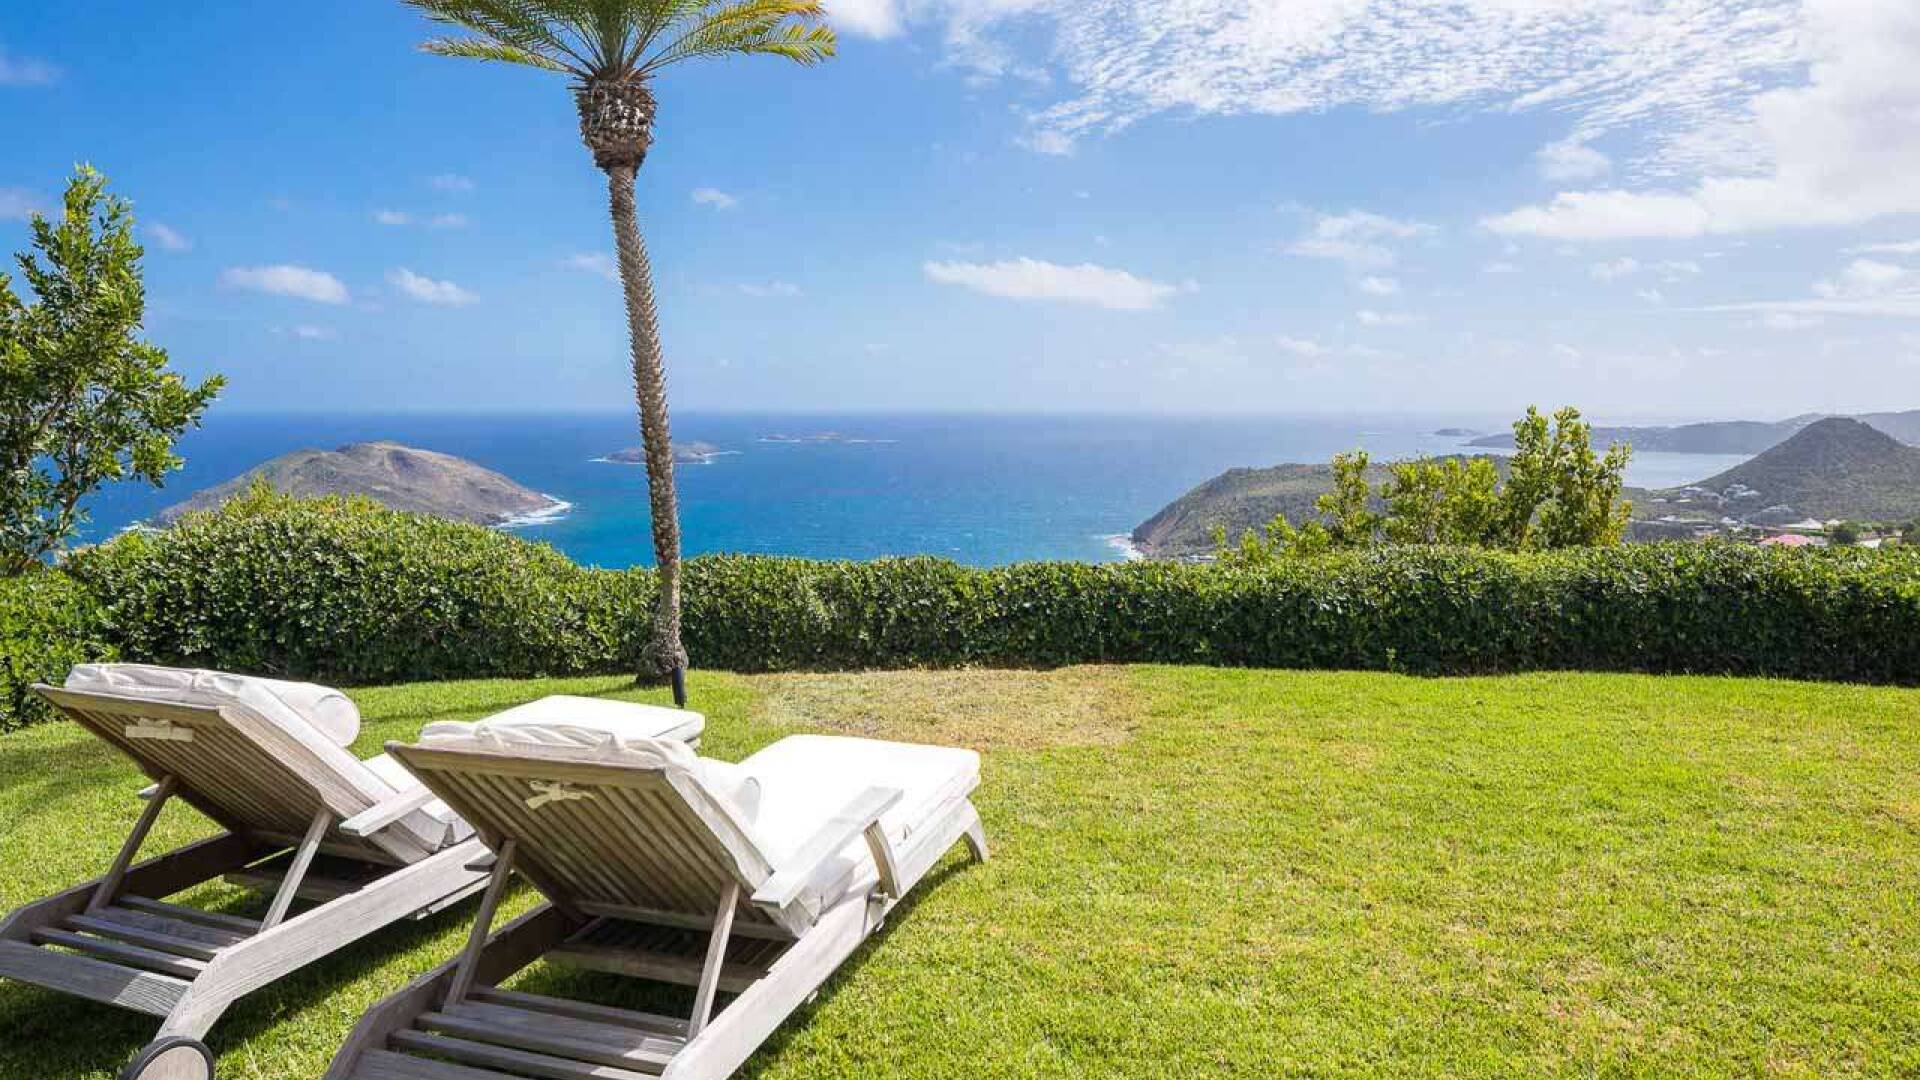 The view from WV PBO, Colombier, St. Barthelemy